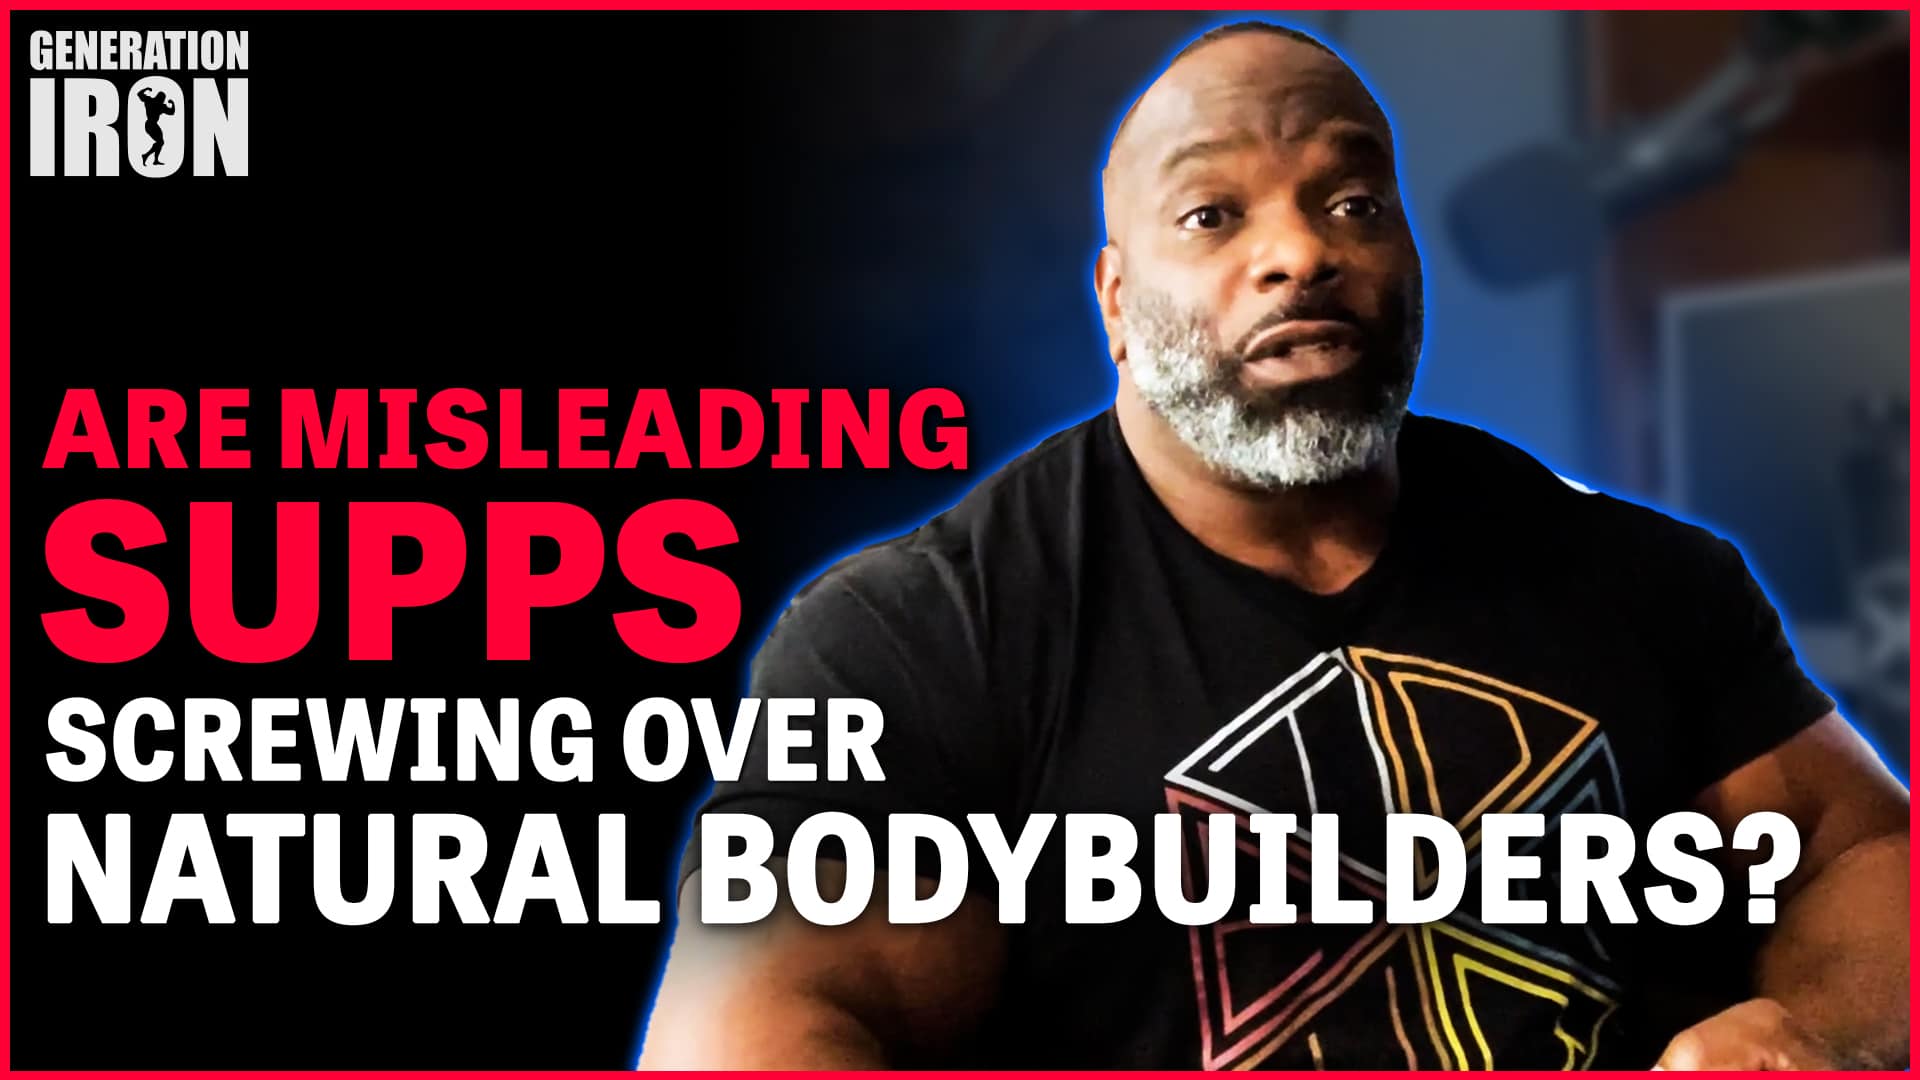 Hardcore Truth: Are Misleading Supplement Companies Hurting Natural Bodybuilder Careers?